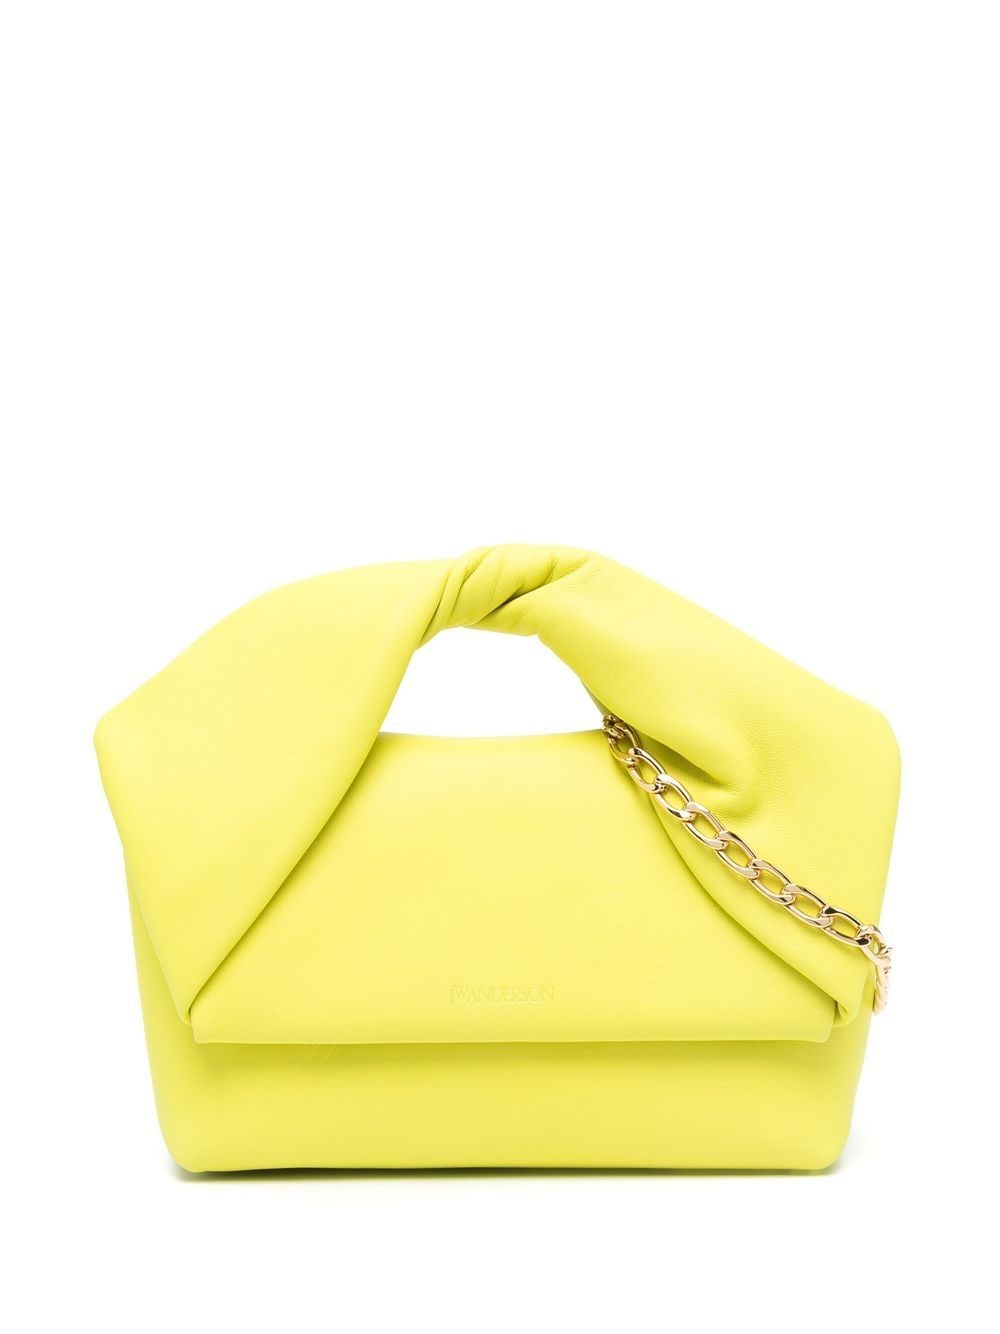 JW Anderson leather tote bag - Green